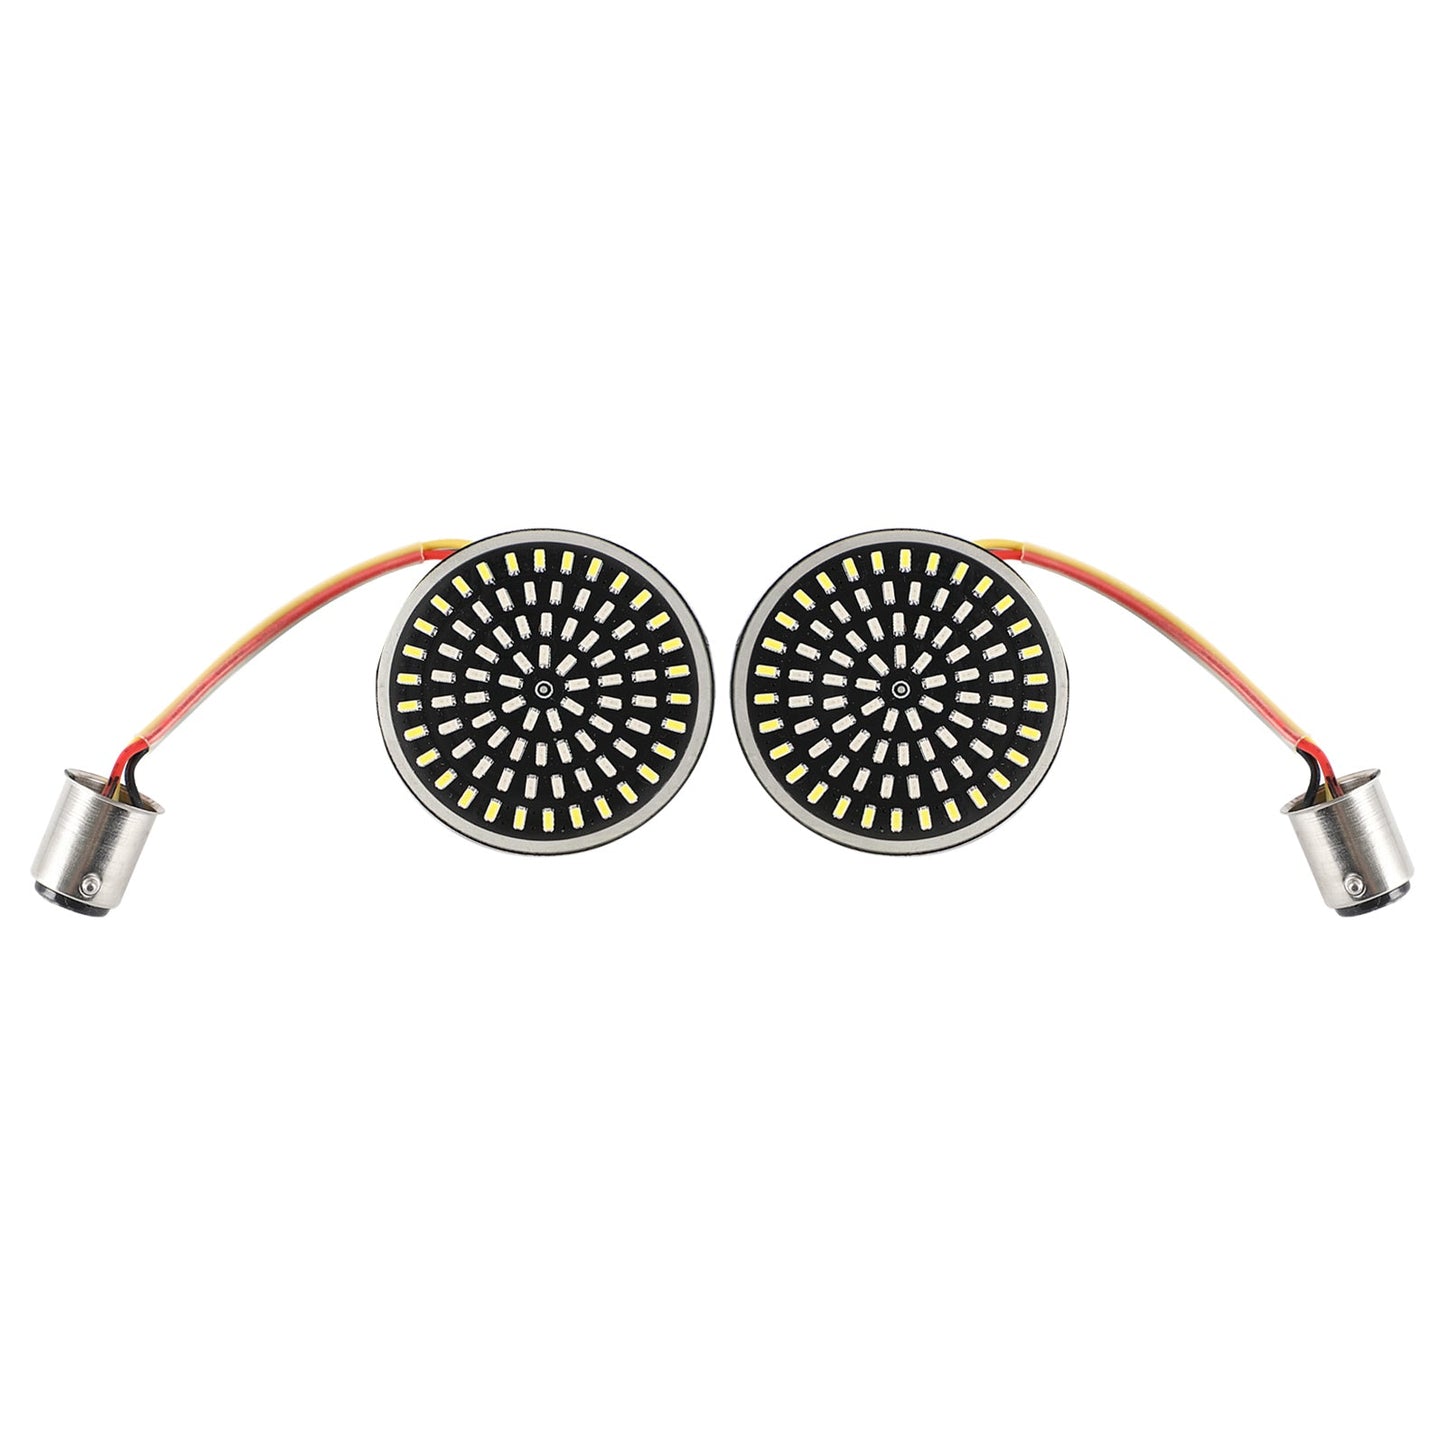 1157 LED Turn Signal Light Inserts Lamp Fit for Softail Touring Dyna Sportster Red